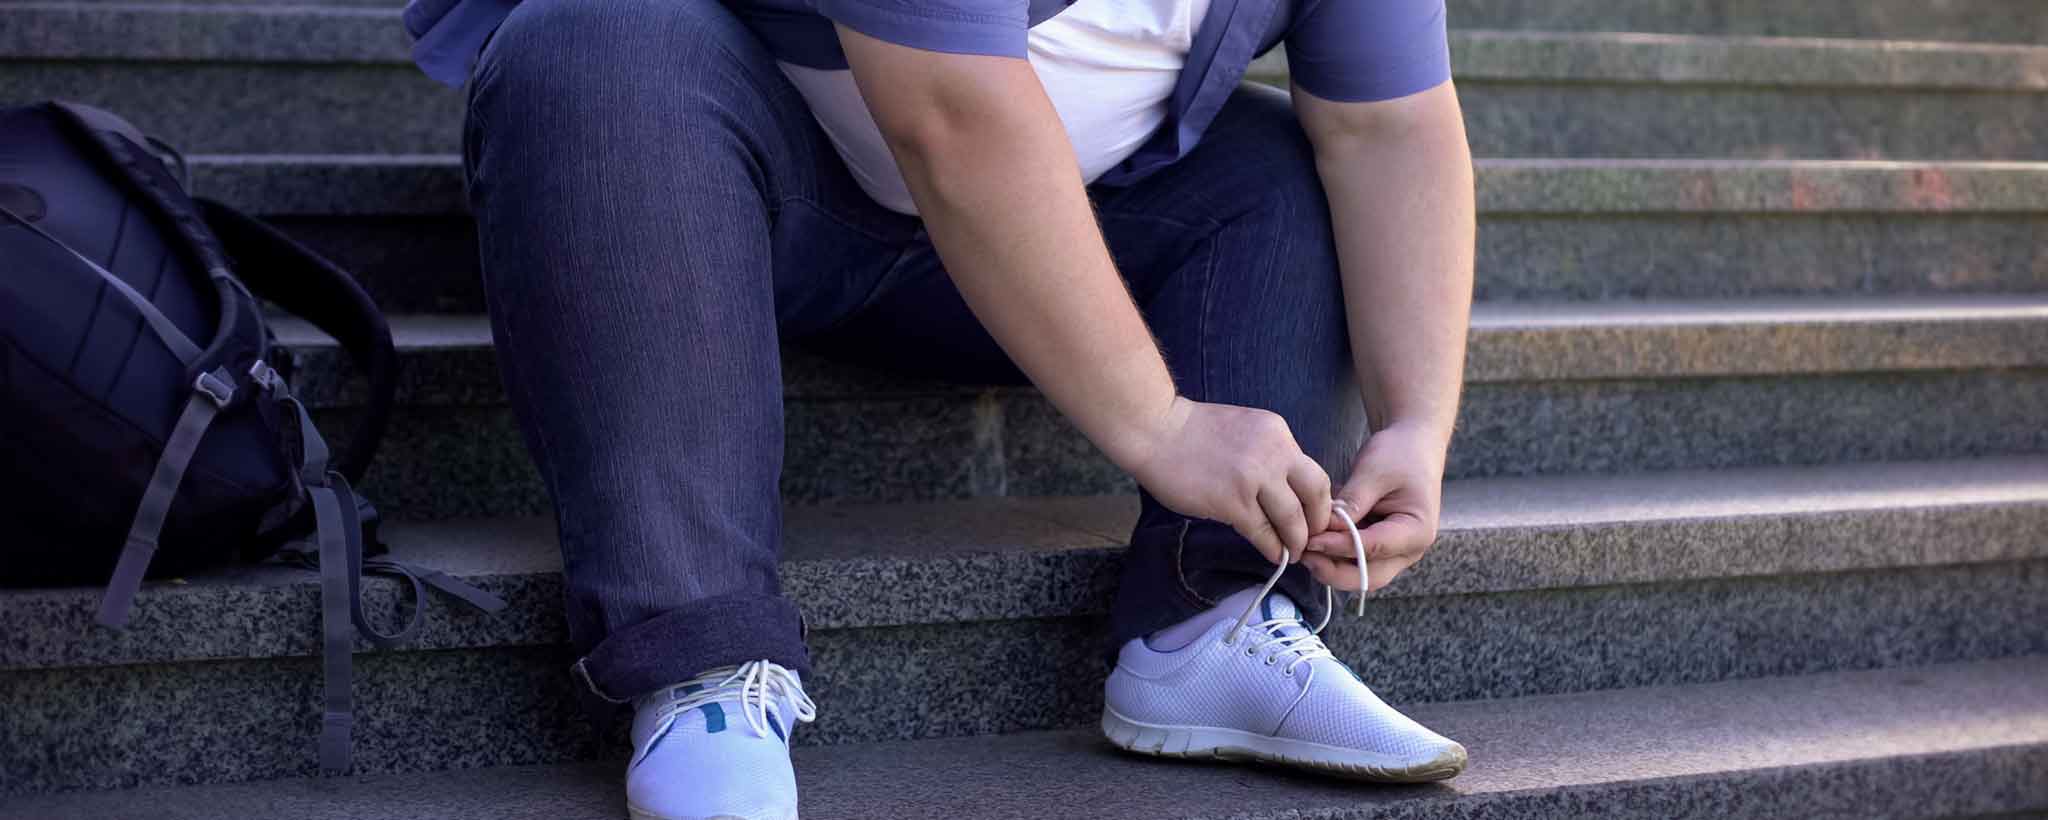 'Obese man tying shoes'